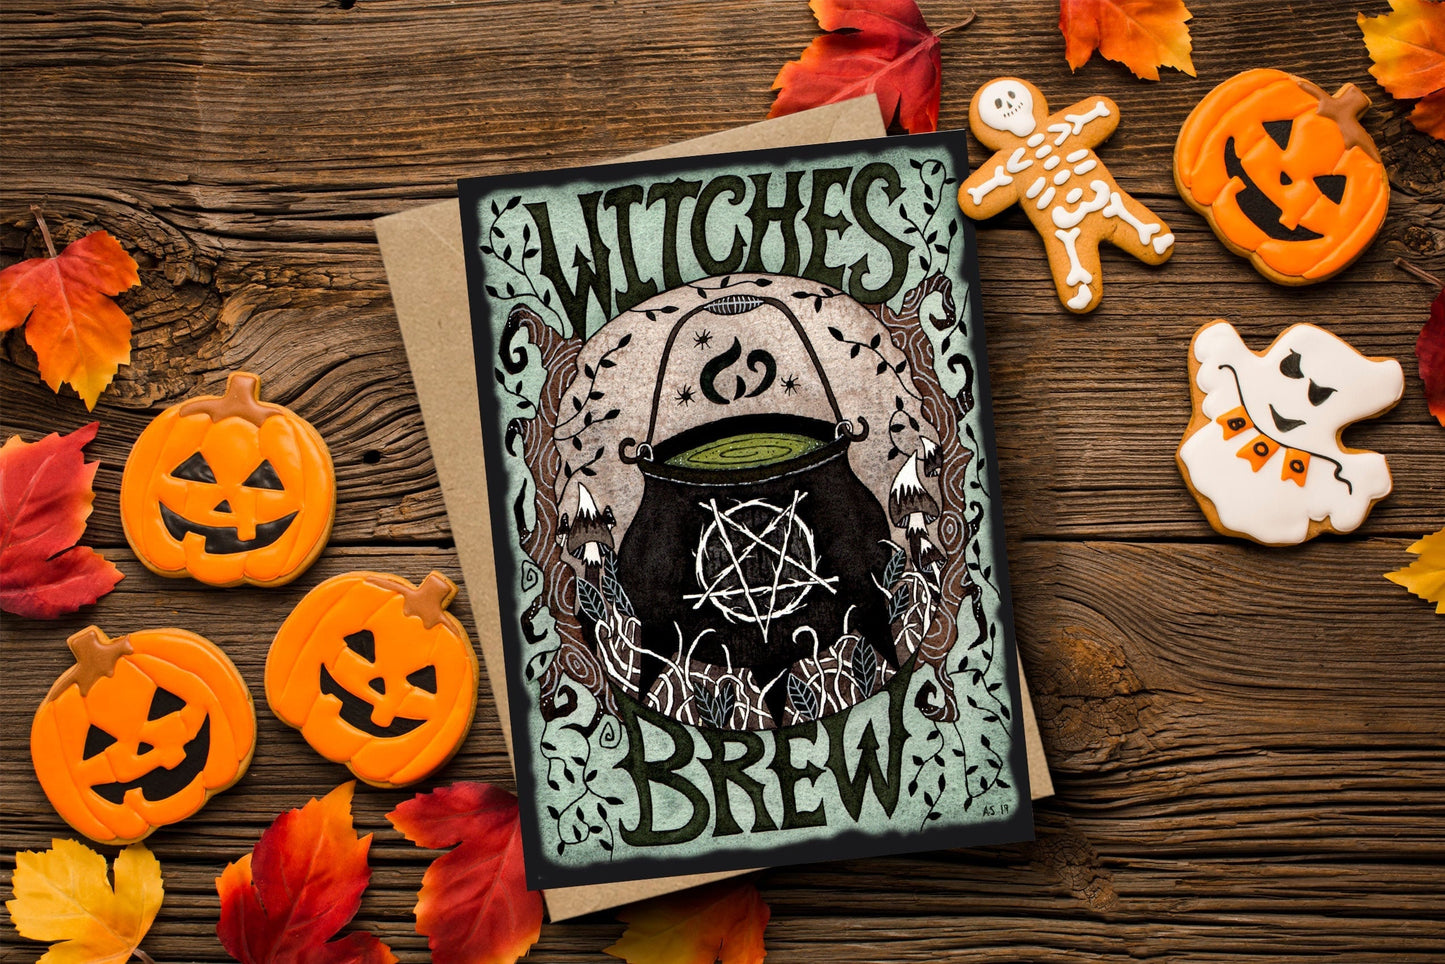 Witches Brew Greetings Card & Envelope - Black Green Pentagram Cauldron Illustrated Card - Gothic Alternative Witch Pagan Halloween Card